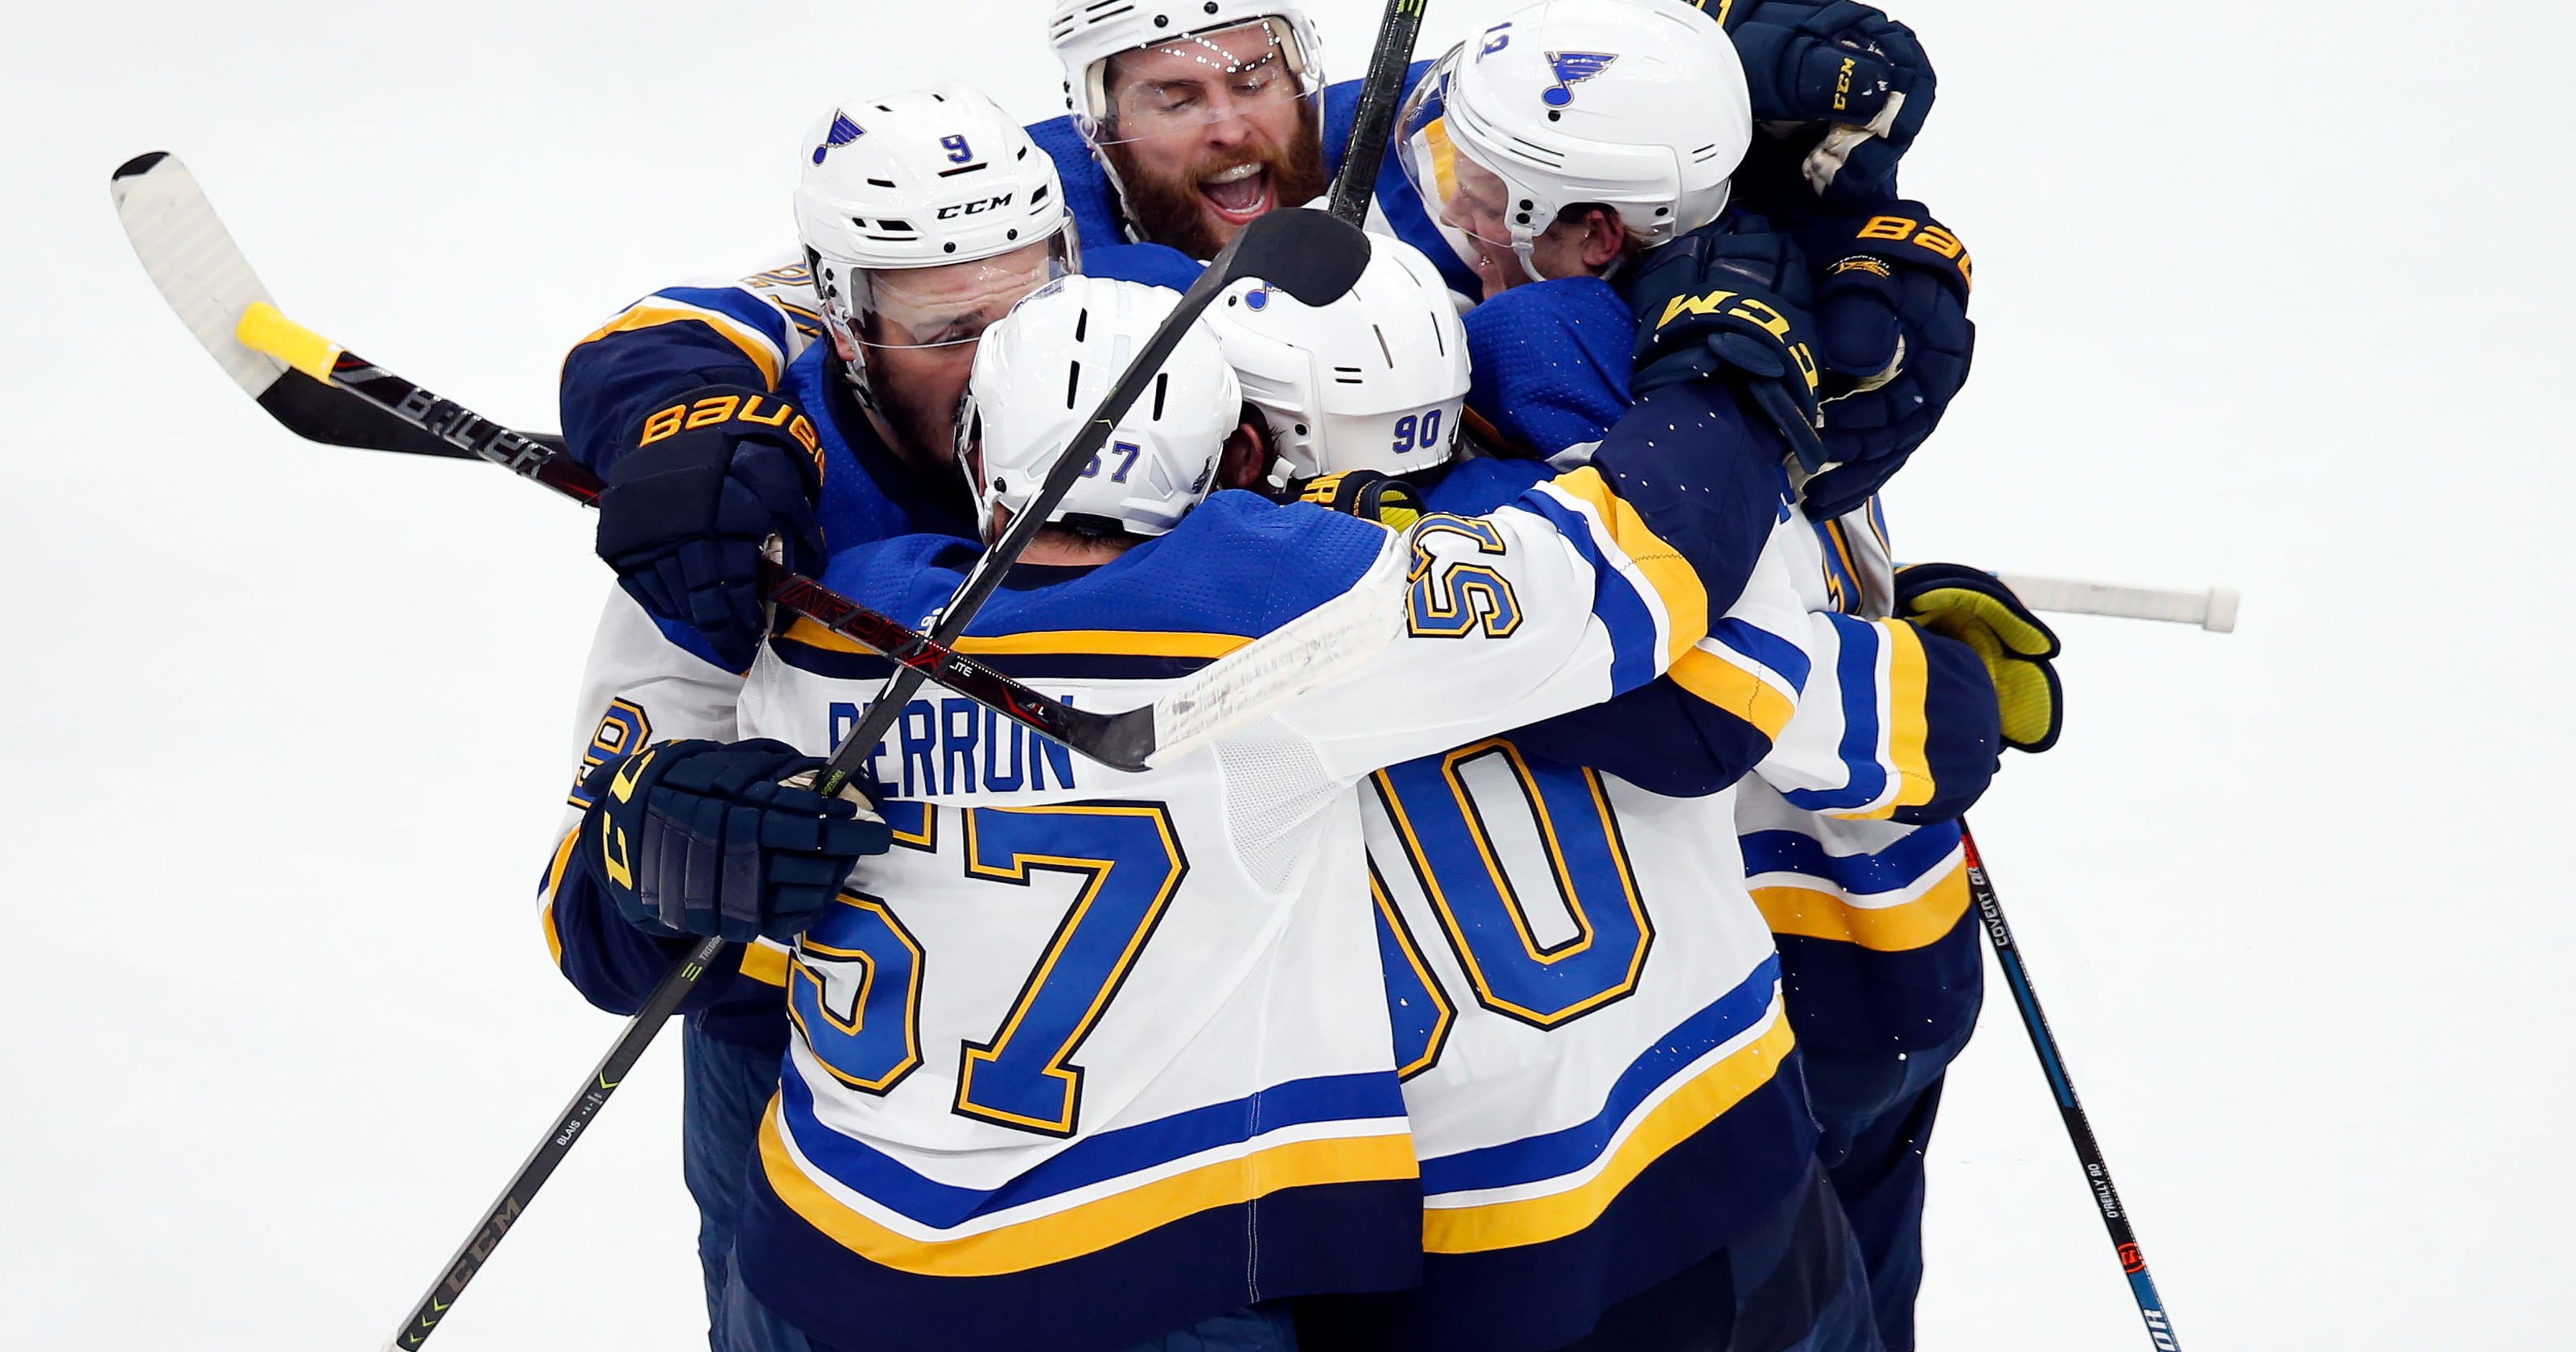 St. Louis Blues win Stanley Cup: Five wild stats from their run